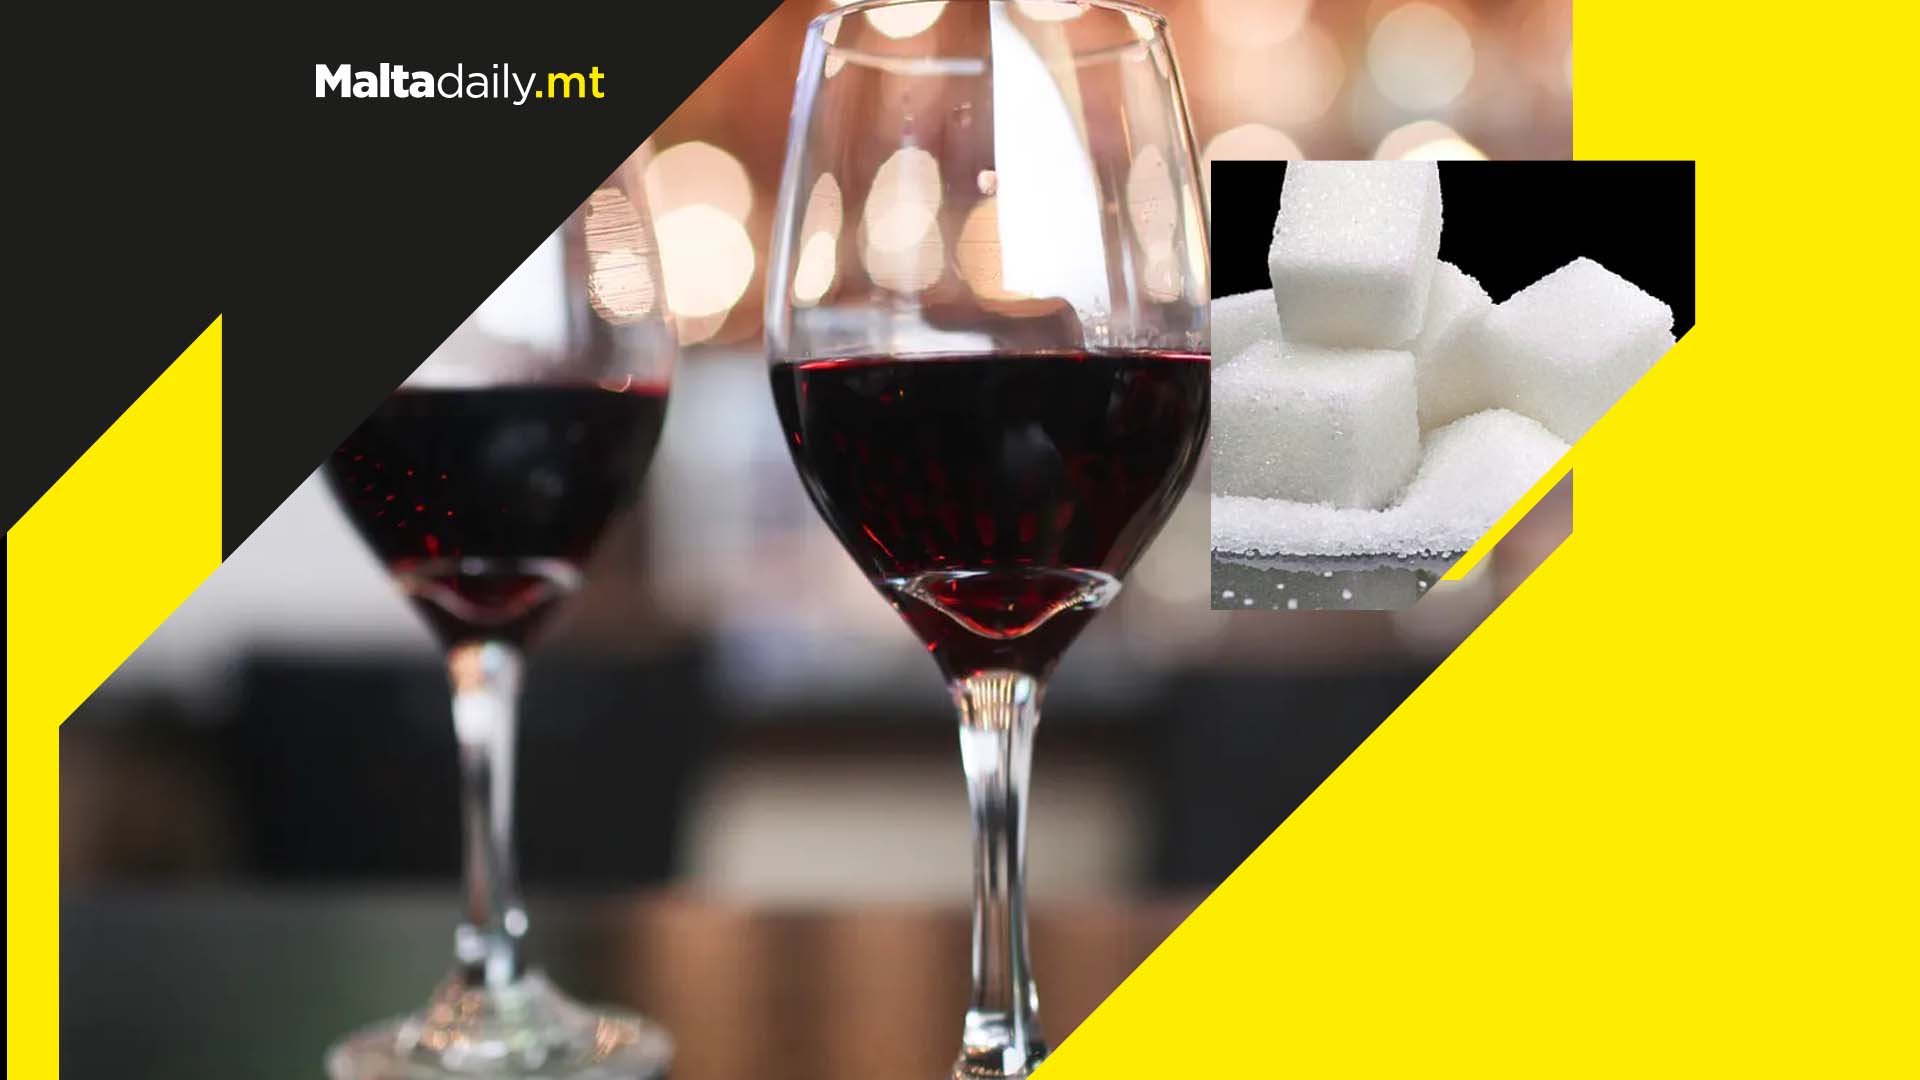 Two glasses of wine could reach the daily sugar intake limit